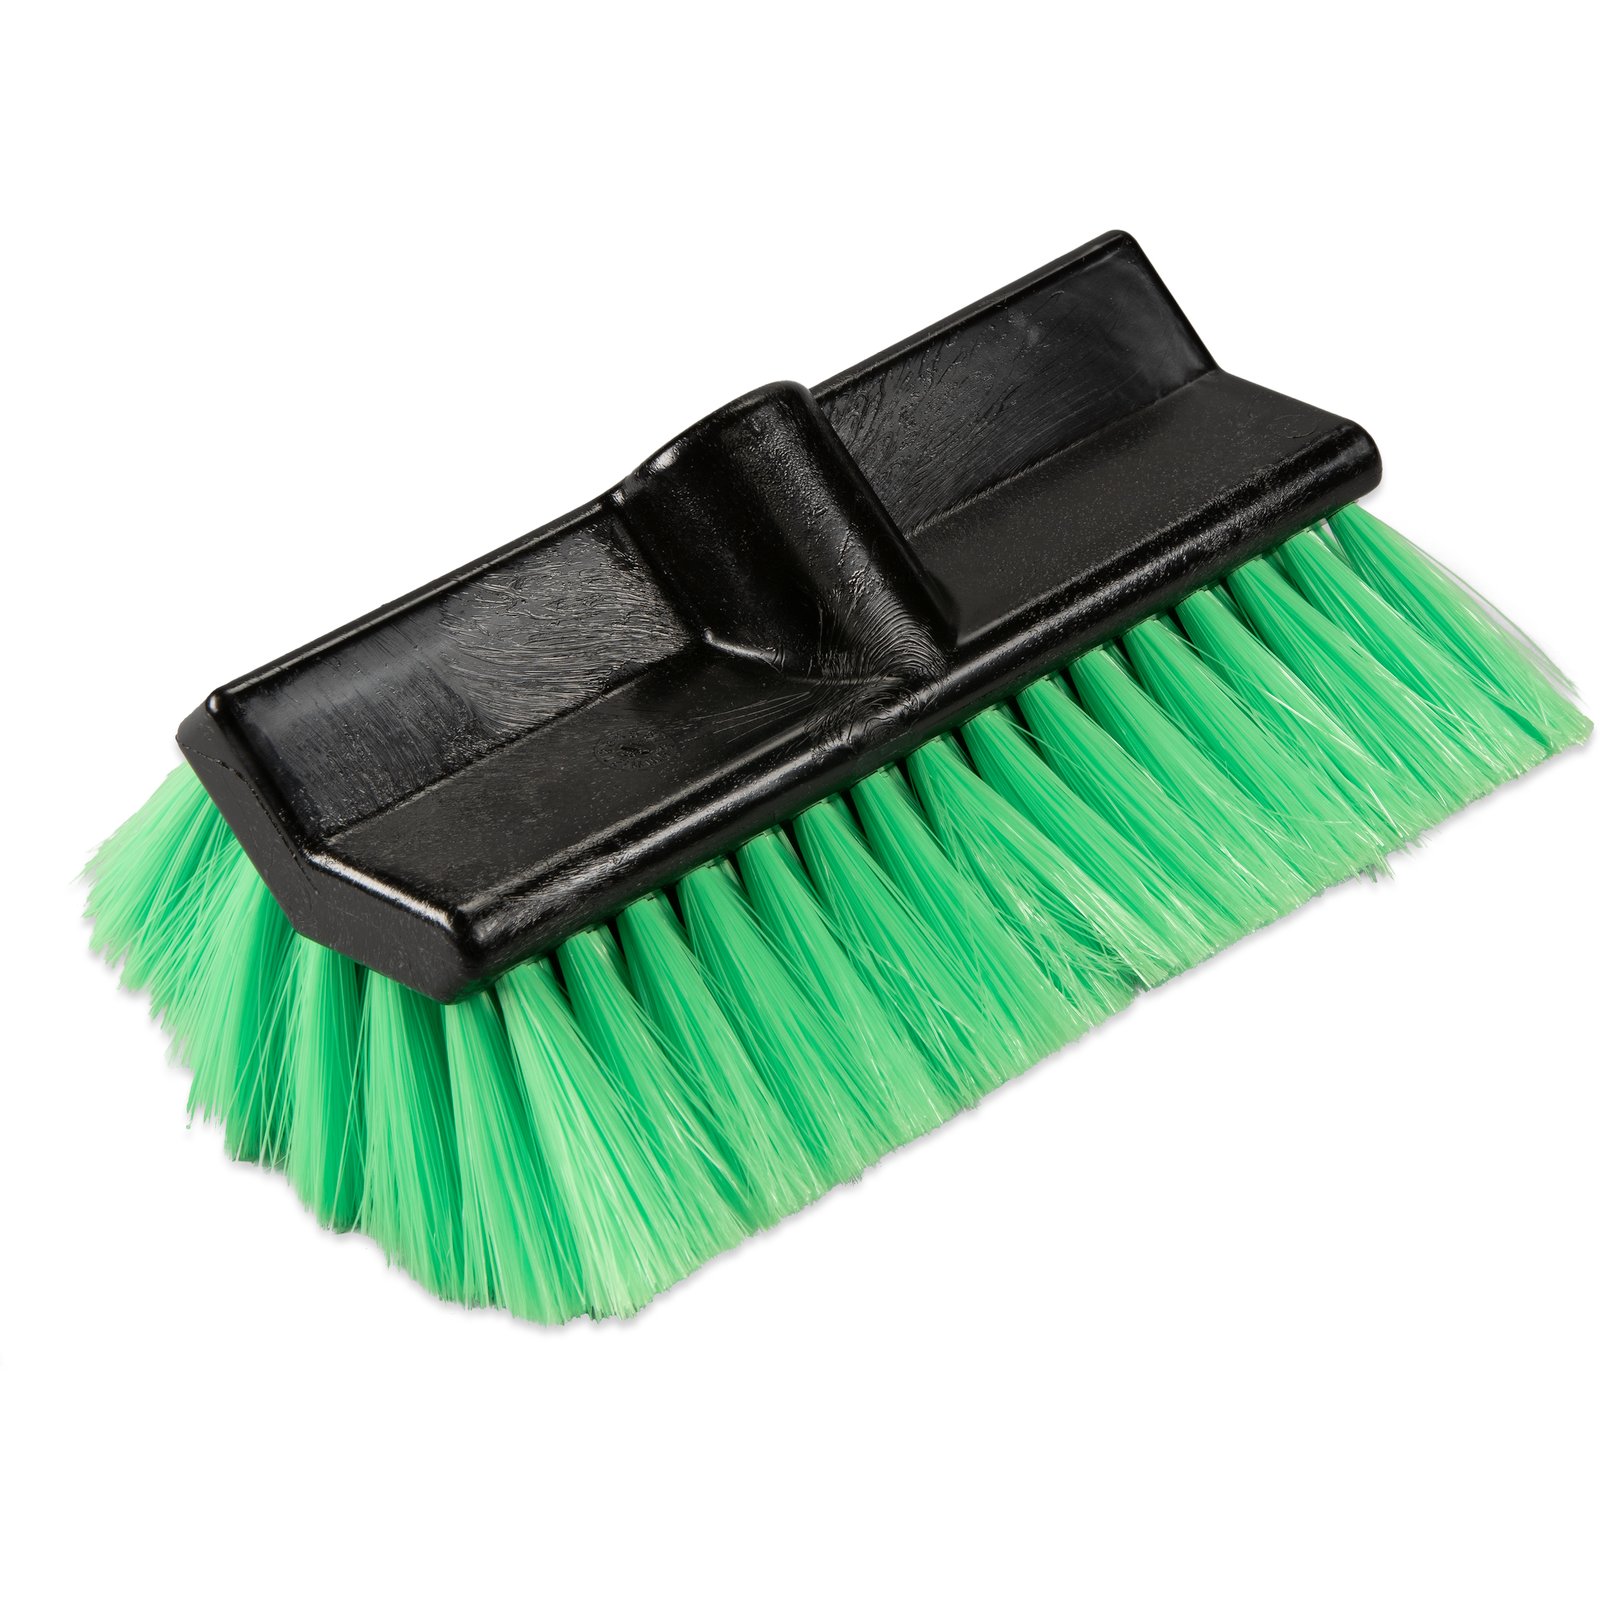 Wallace Motorsports - A0107 - INFINITY CLEANING BRUSH SET